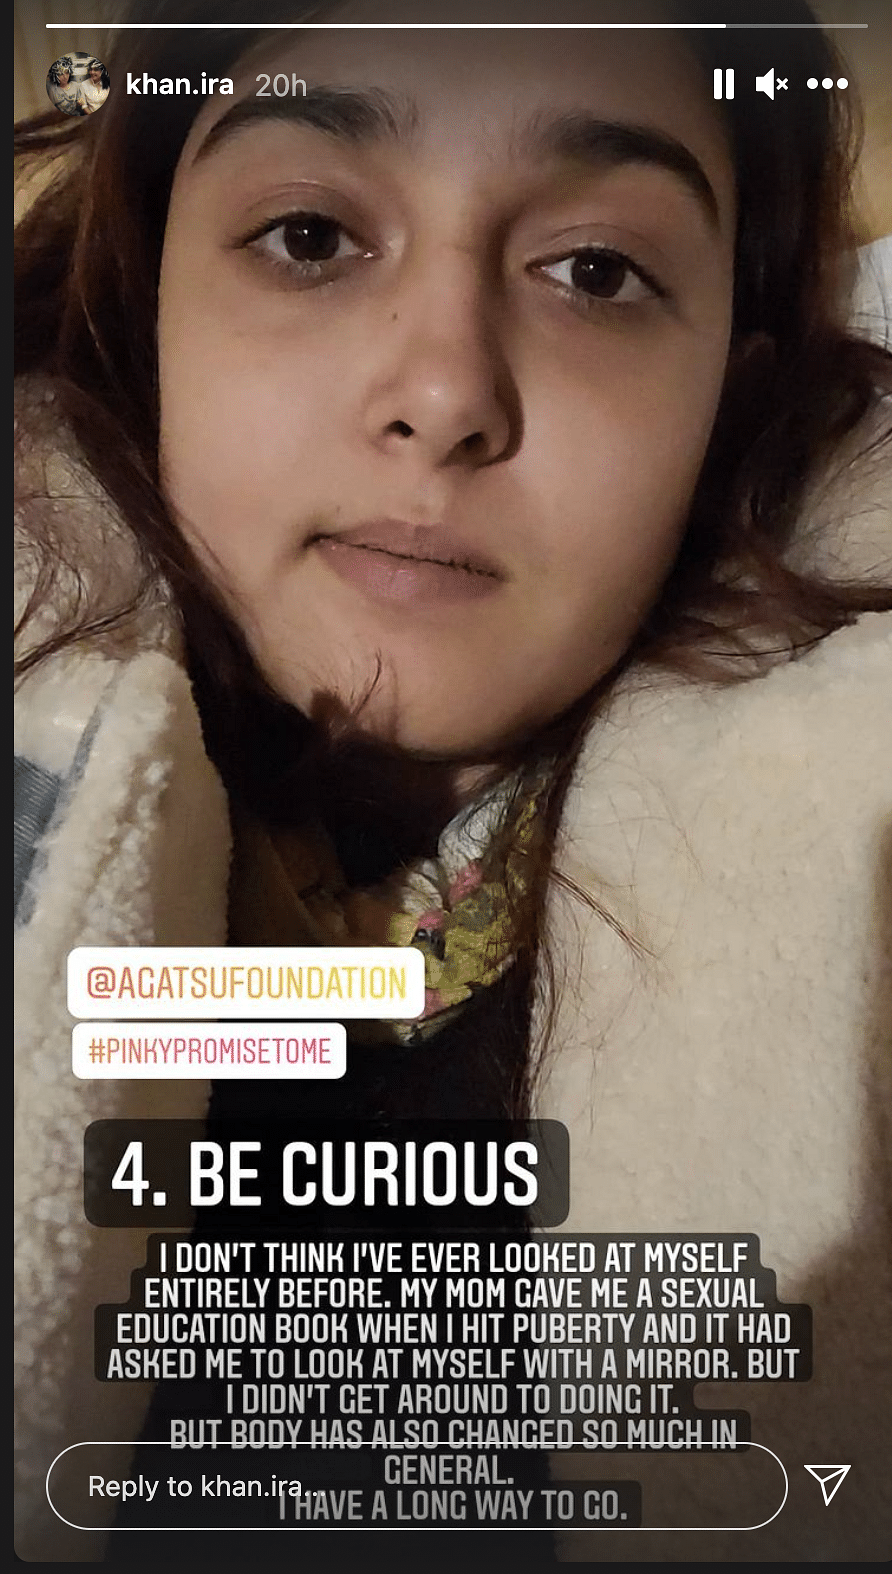 In her latest Instagram post, Ira Khan speaks about accepting one's body. 